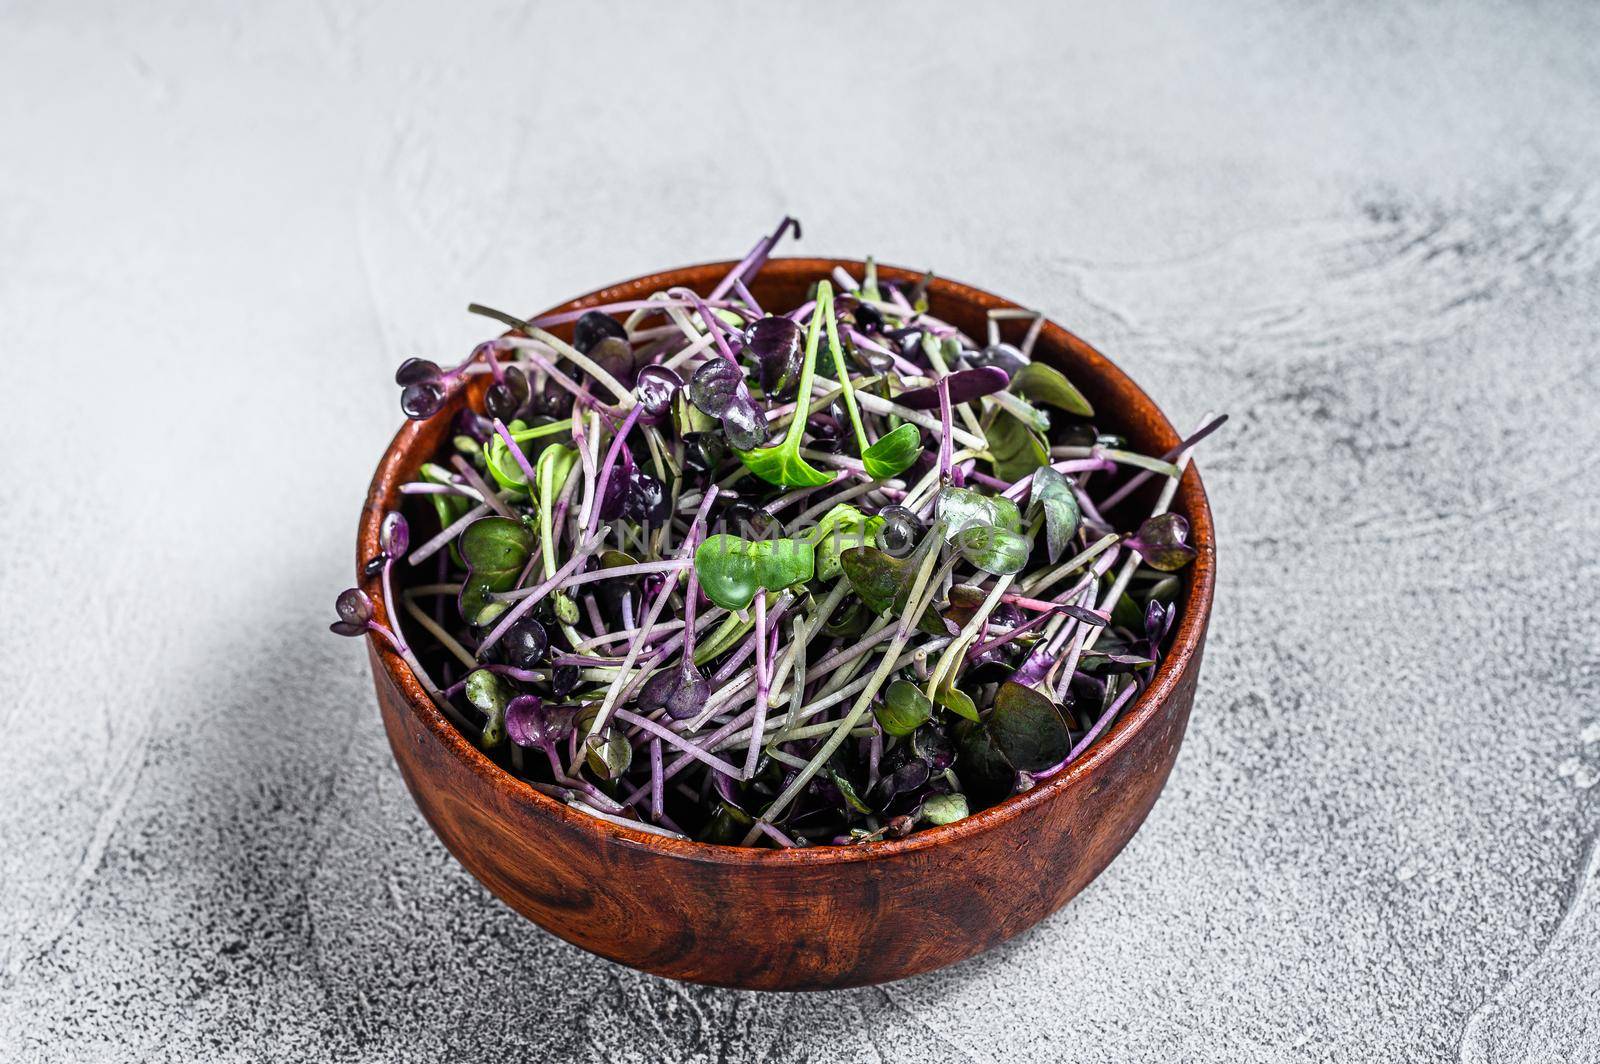 Microgreen radish cress sprouts in a wooden bowl. White background. Top view.